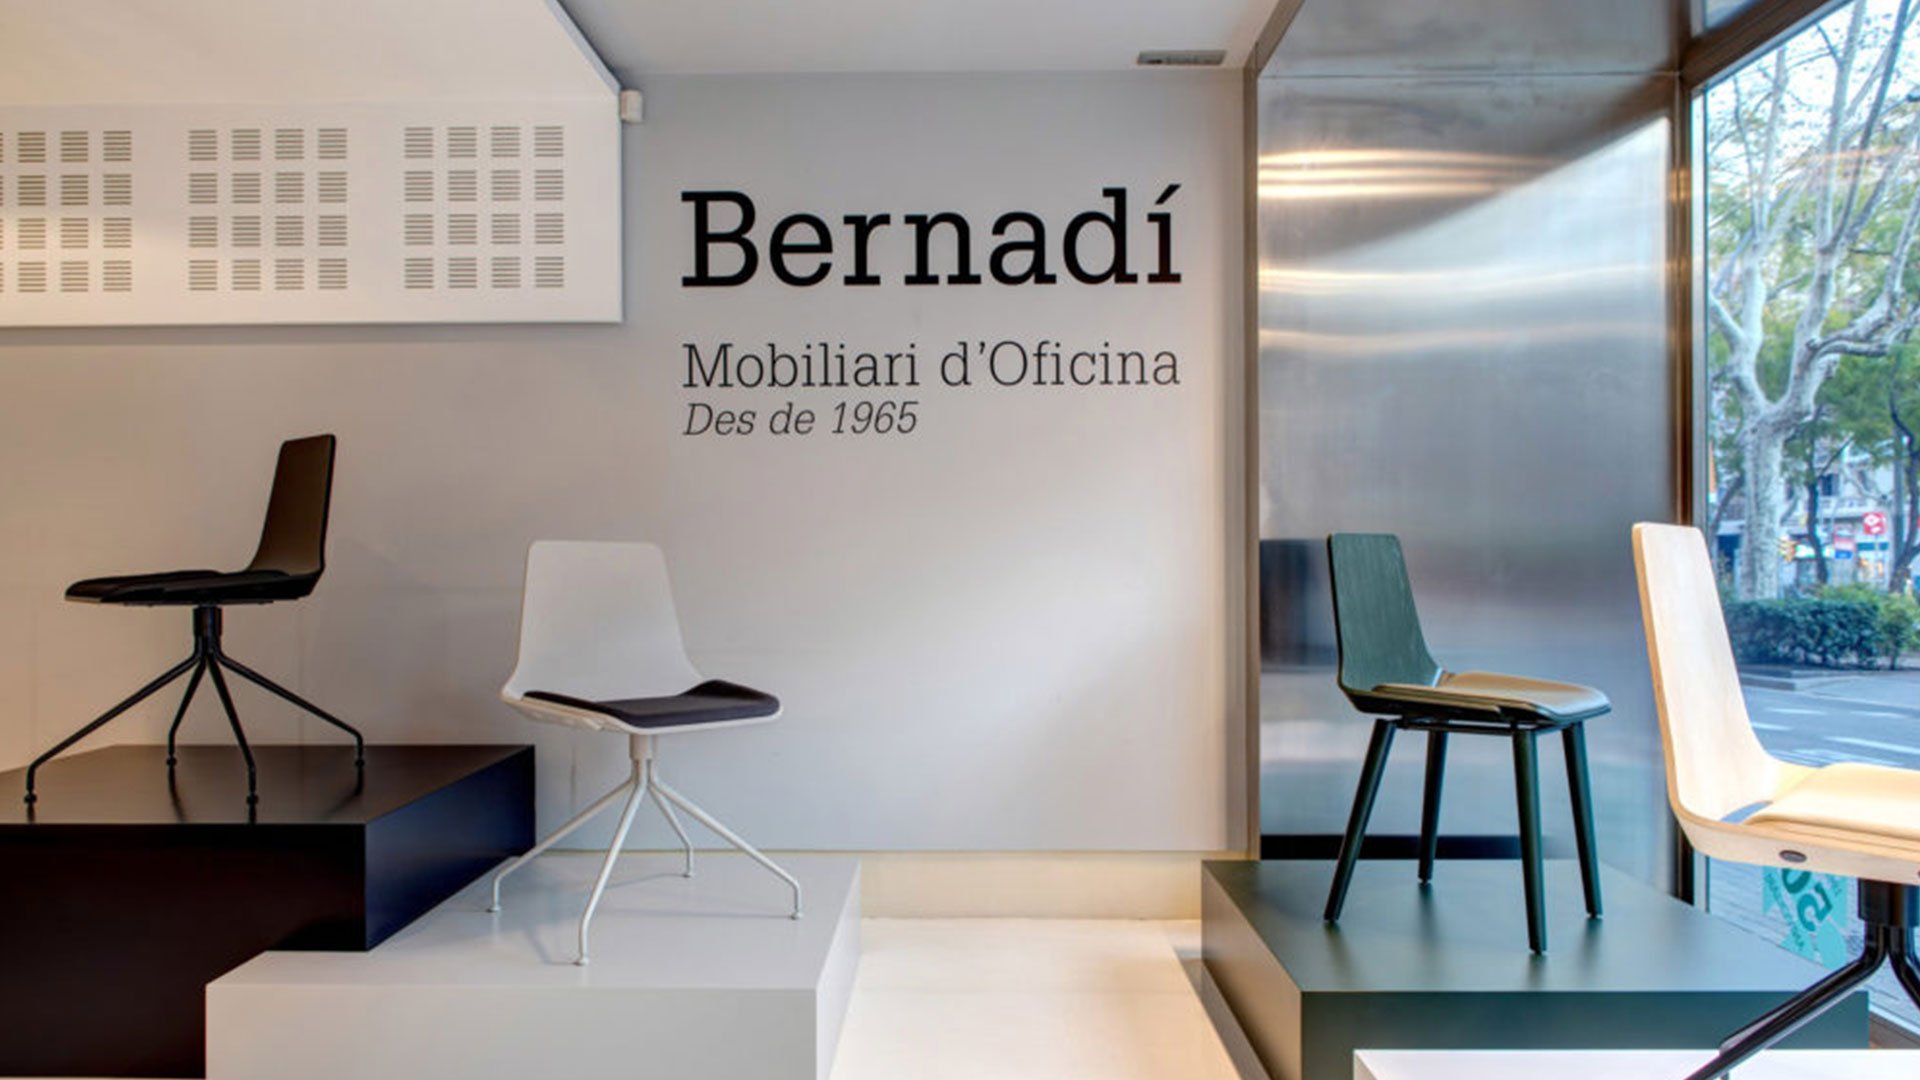 Strategy, design and build of the Bernadí showroom